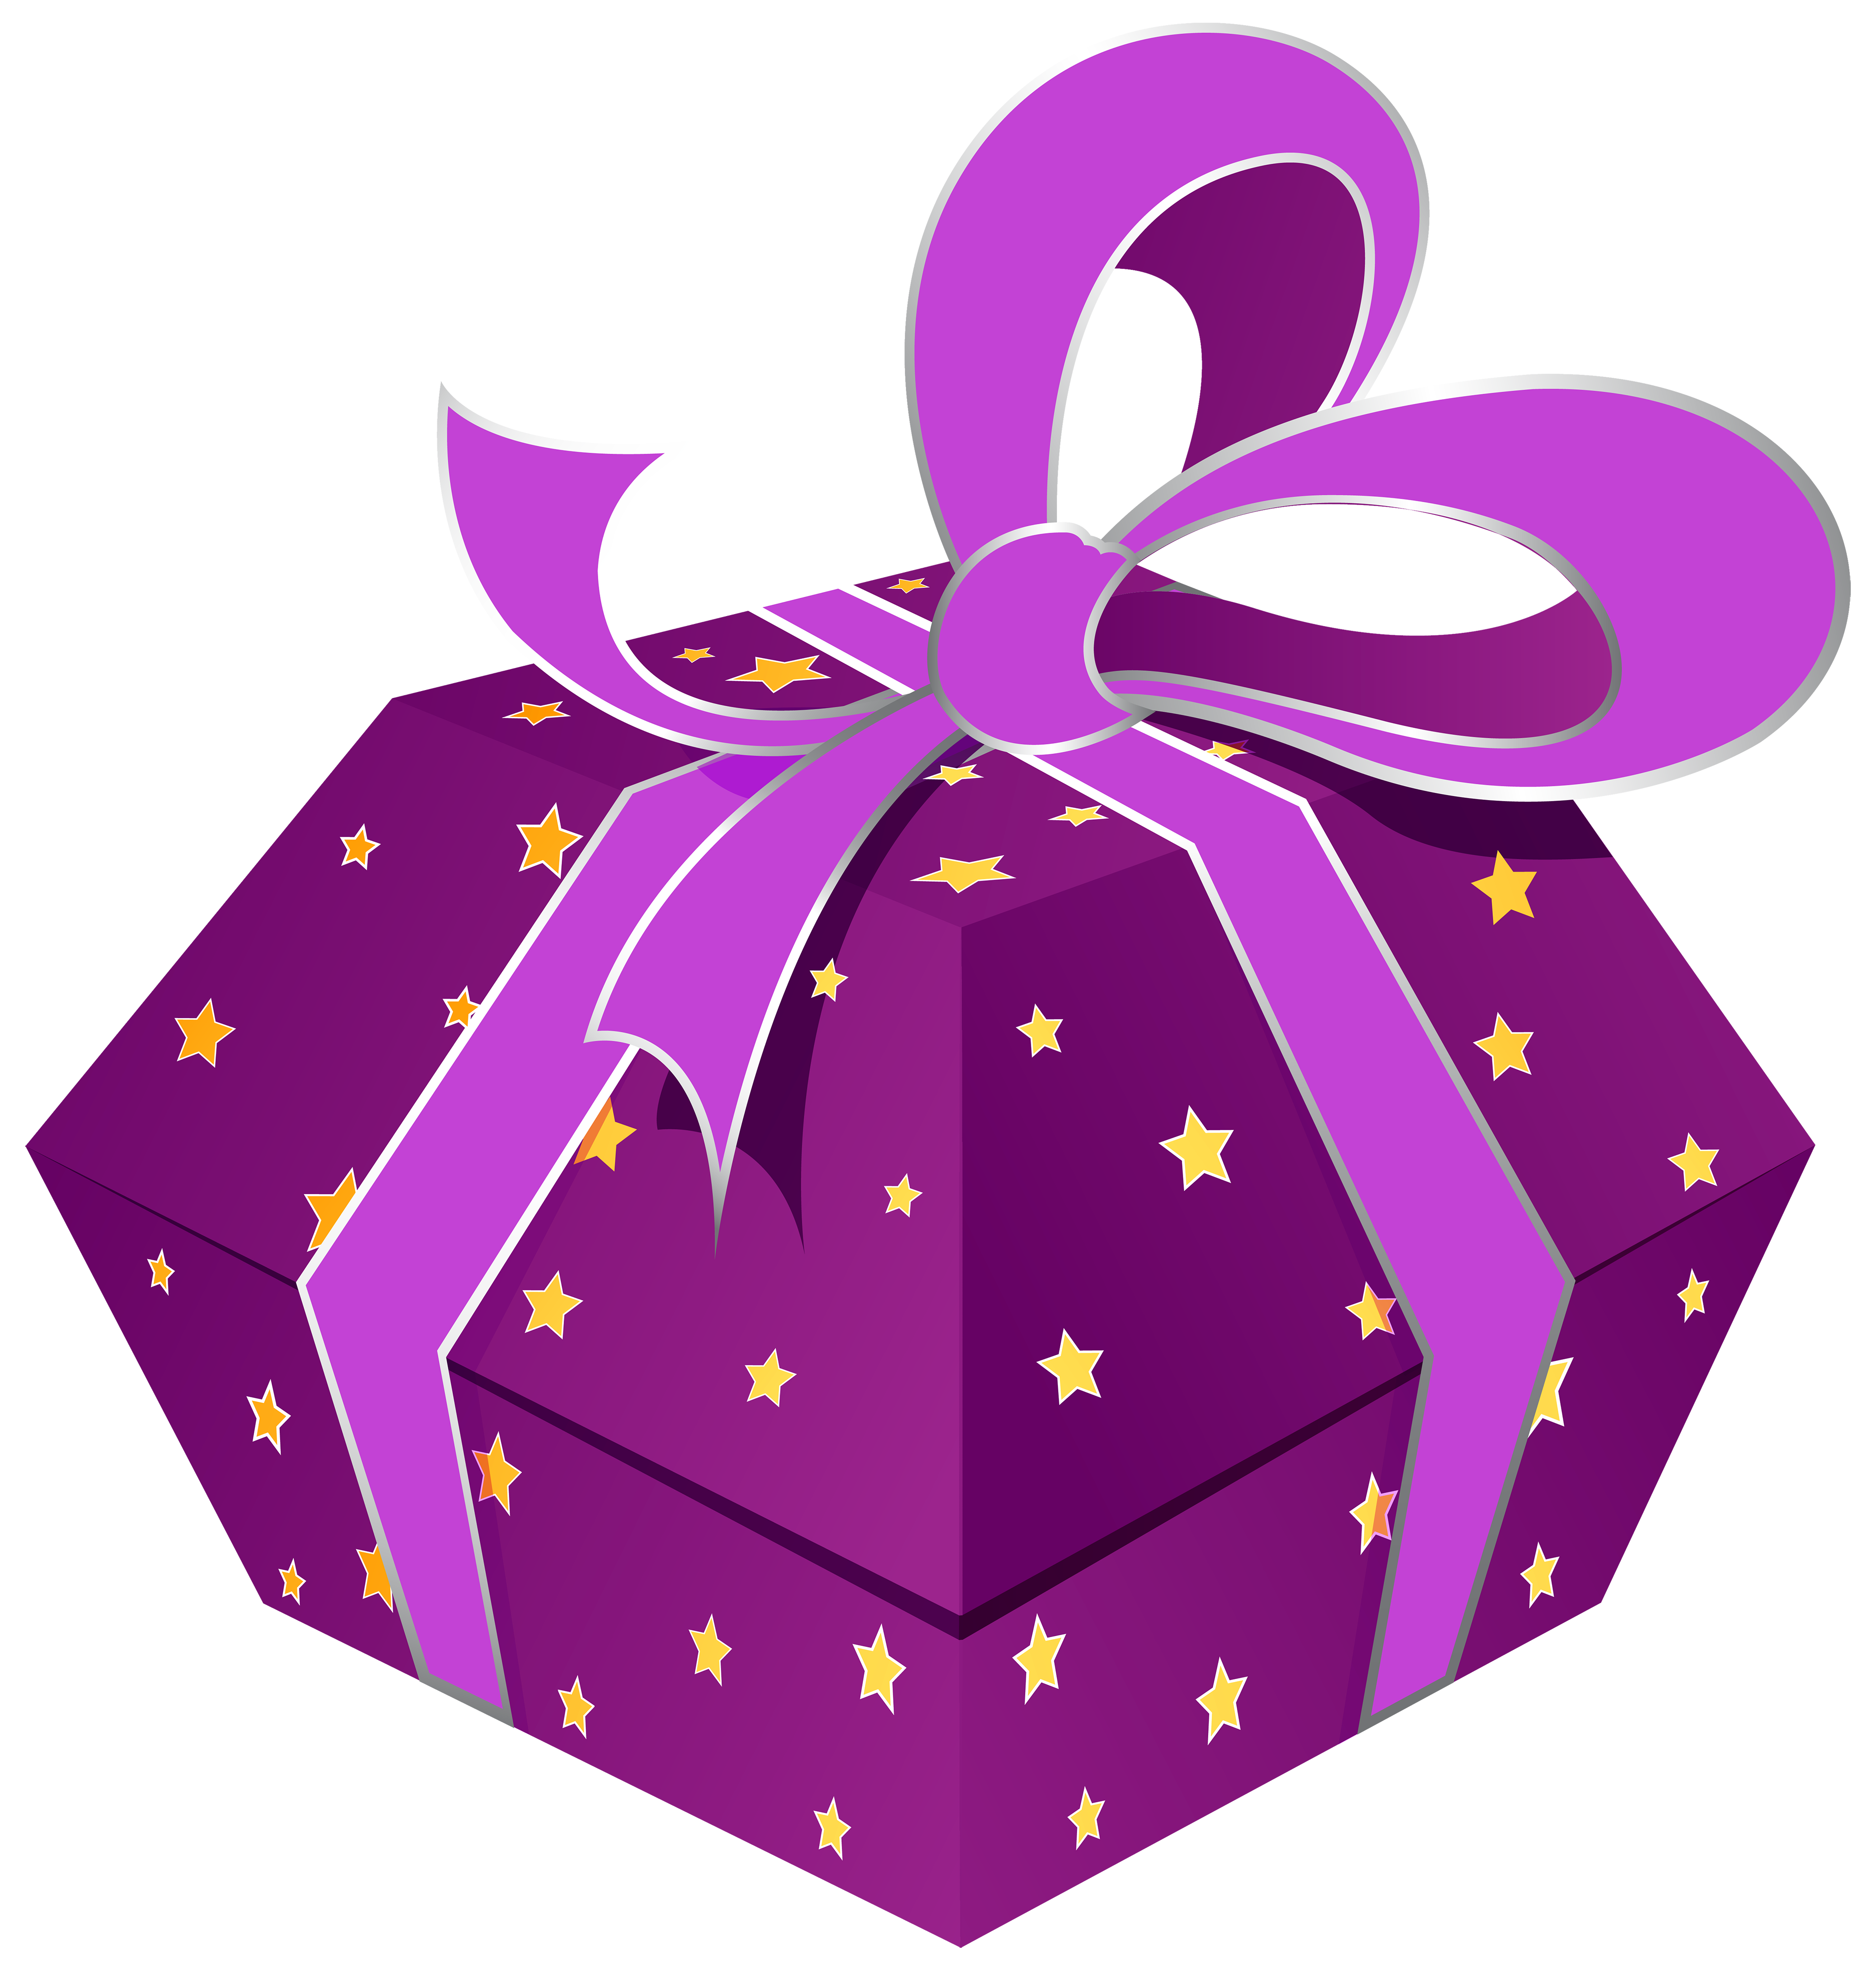 Padlock clipart violet. Purple gift box with